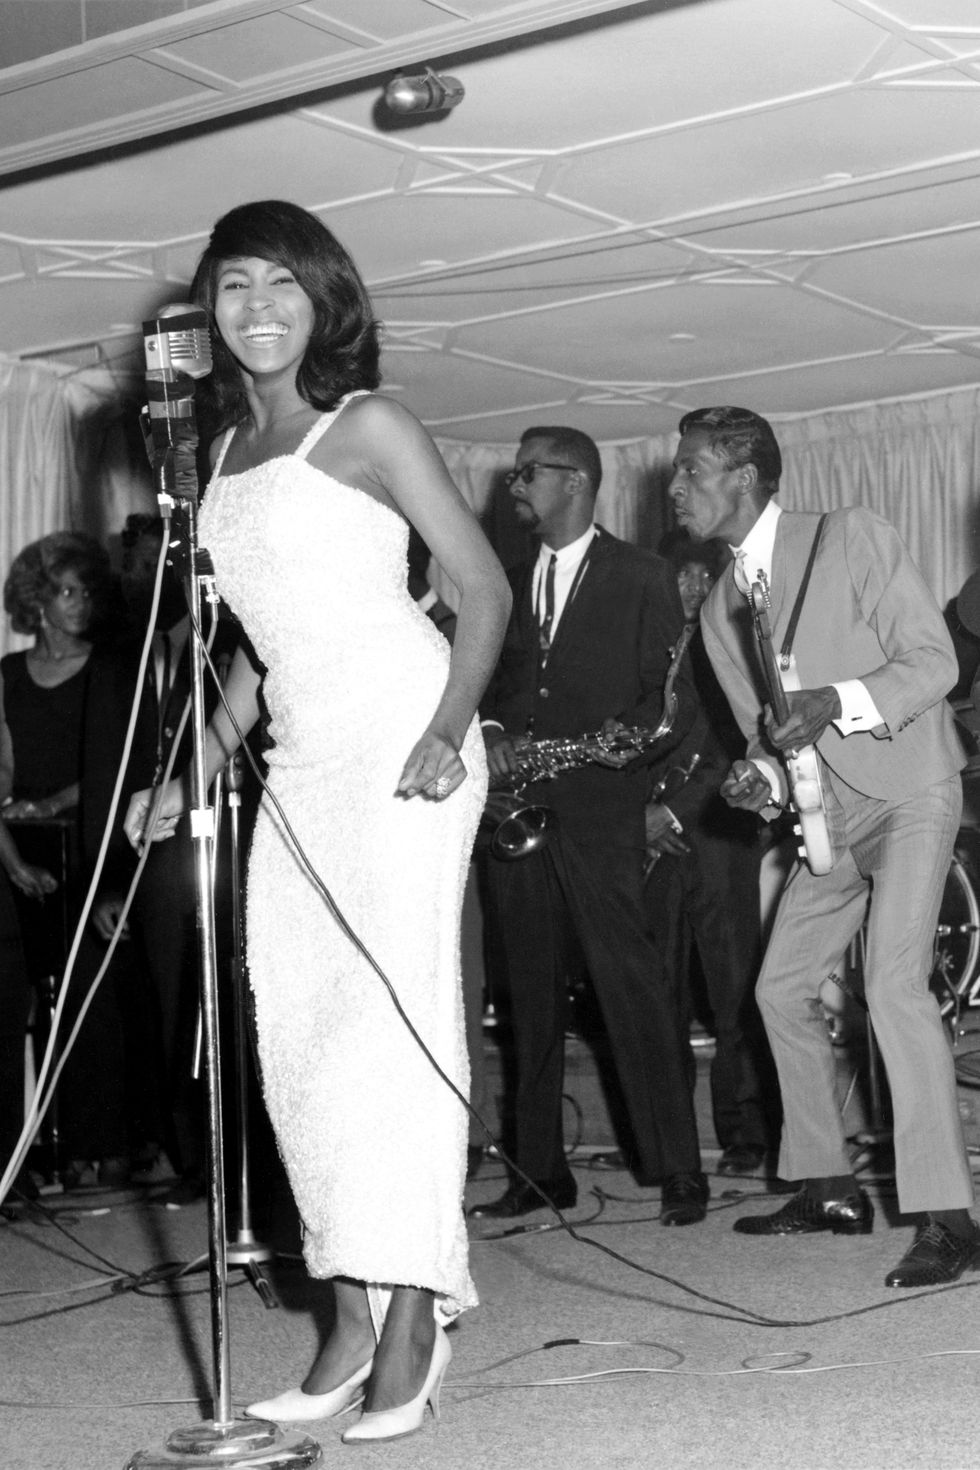 tina turner singing at a microphone, musicians play behind her